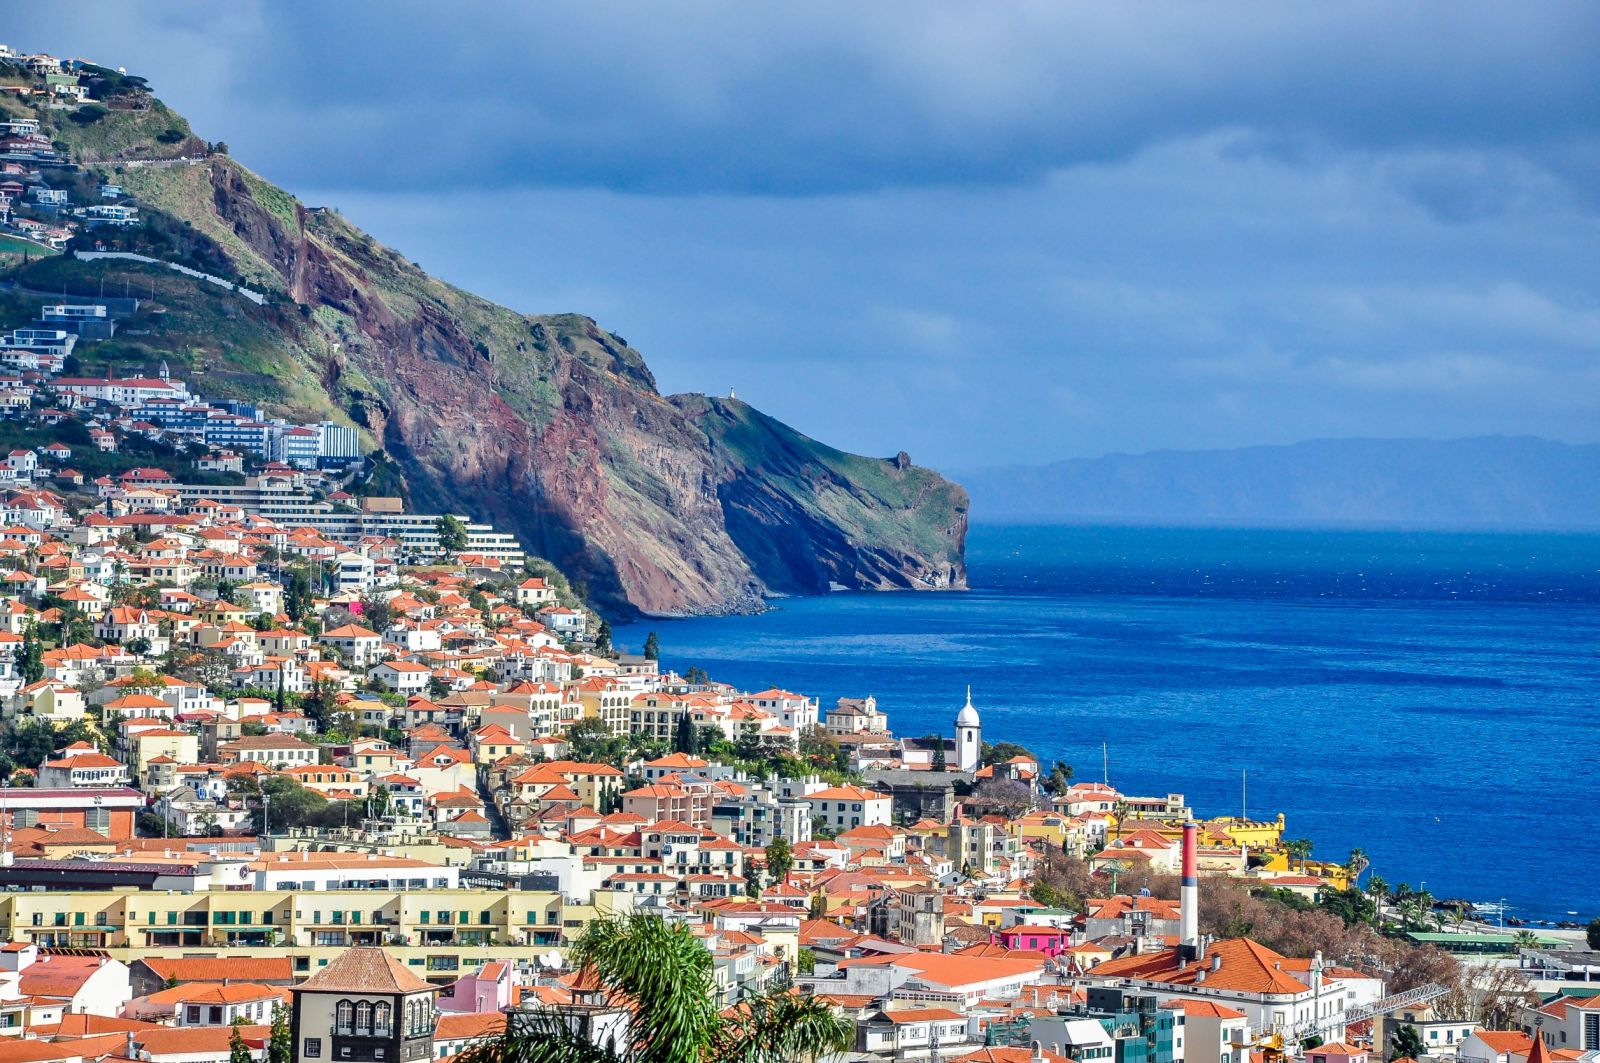 Landscape of Madeira and city of Funchal.